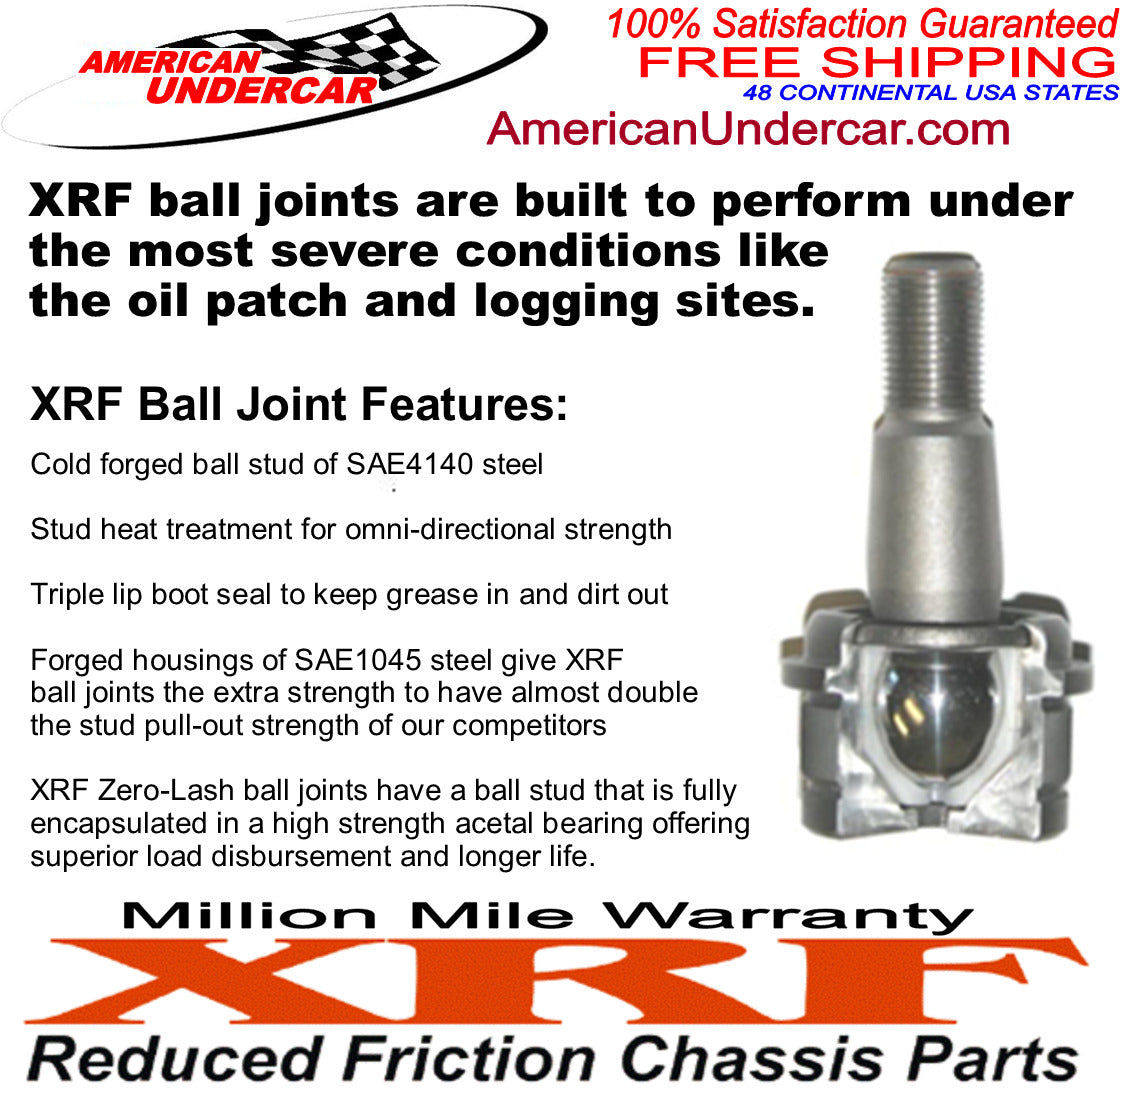 XRF Upper Ball Joints Suspension Kit for 2011-2019 Chevrolet, GMC 2500HD, 3500HD, 2WD, 4x4